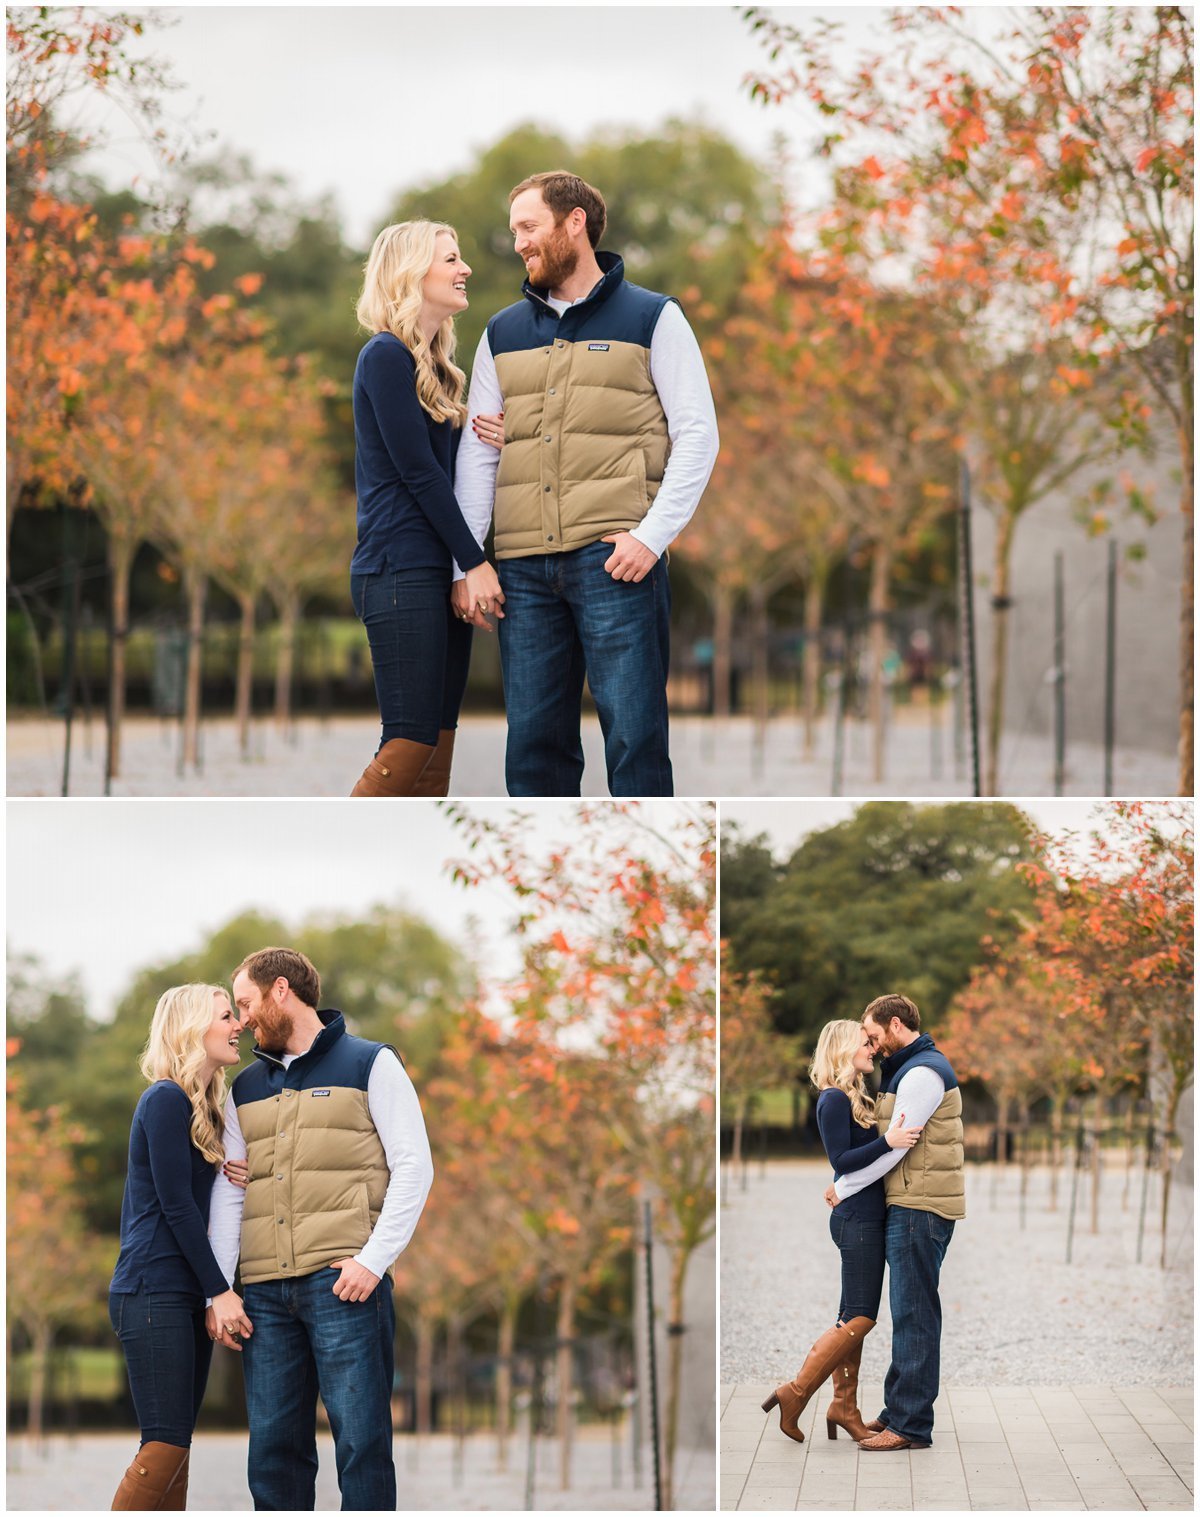 Adorable Fall & Winter Engagement Photos in Houston